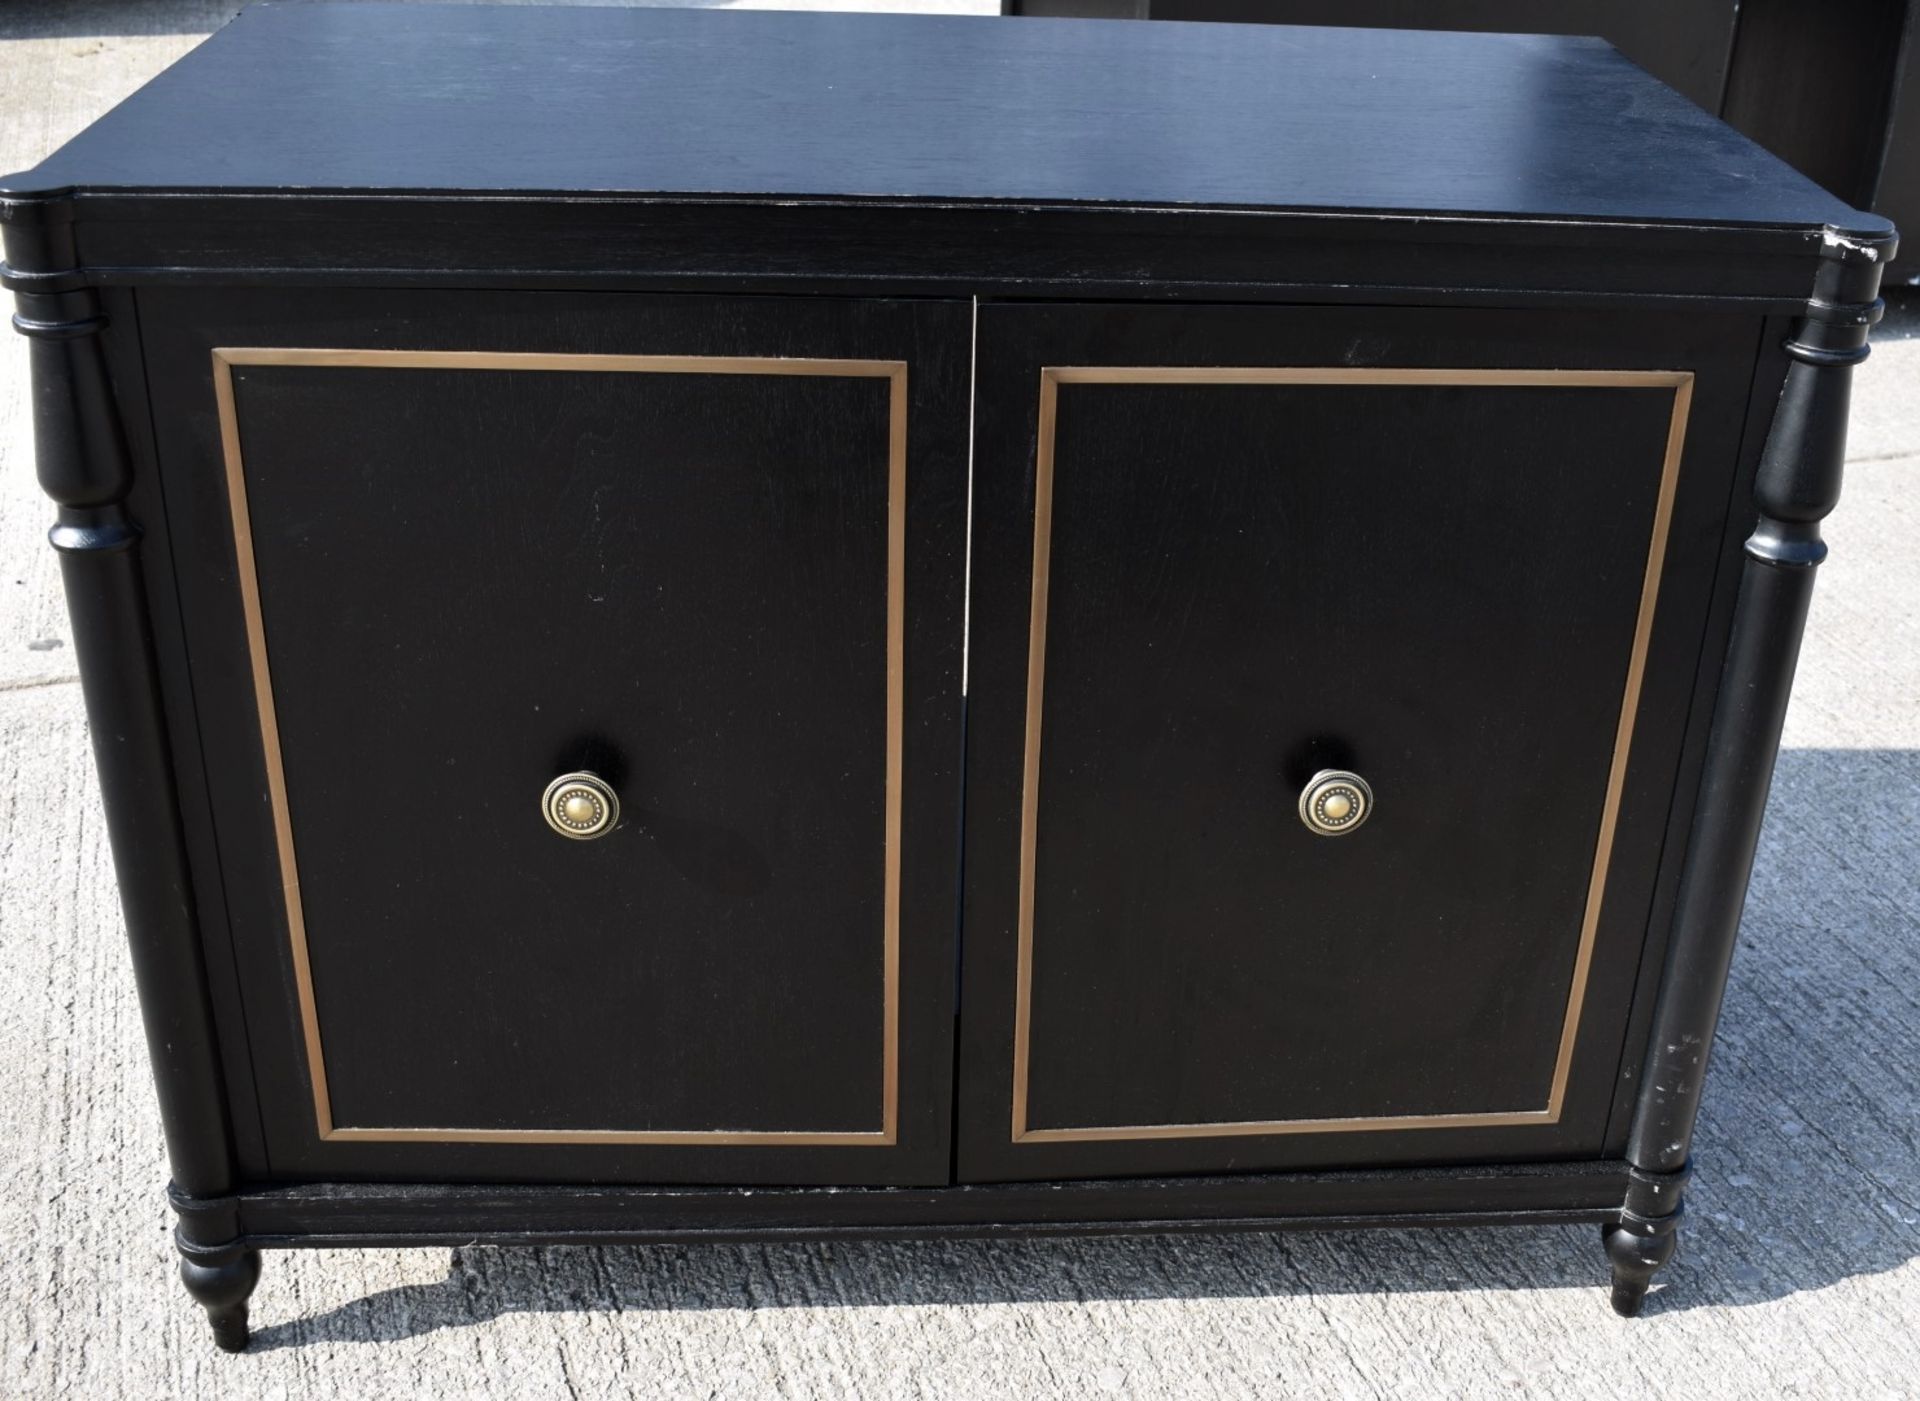 1 x Opulent 2-Door French Period-Style Handcrafted Solid Wood Cabinet in Black, with Brass Inlaid - Image 2 of 8